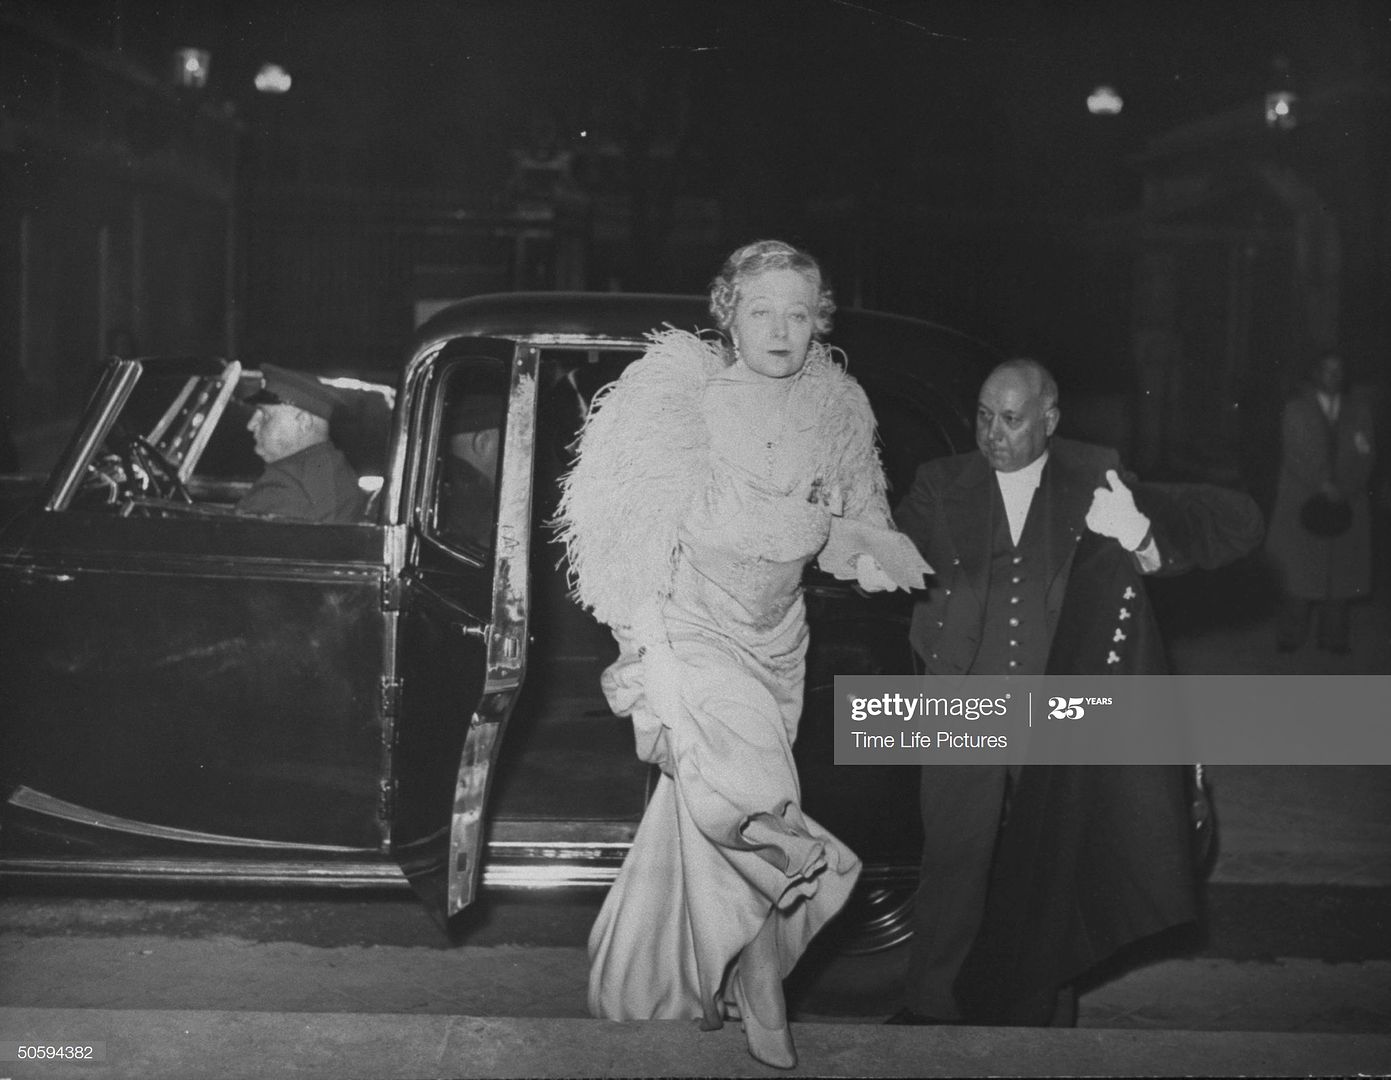 1938_23_Nov_going_to_banquet_gettyimages_50594382_2048x2048